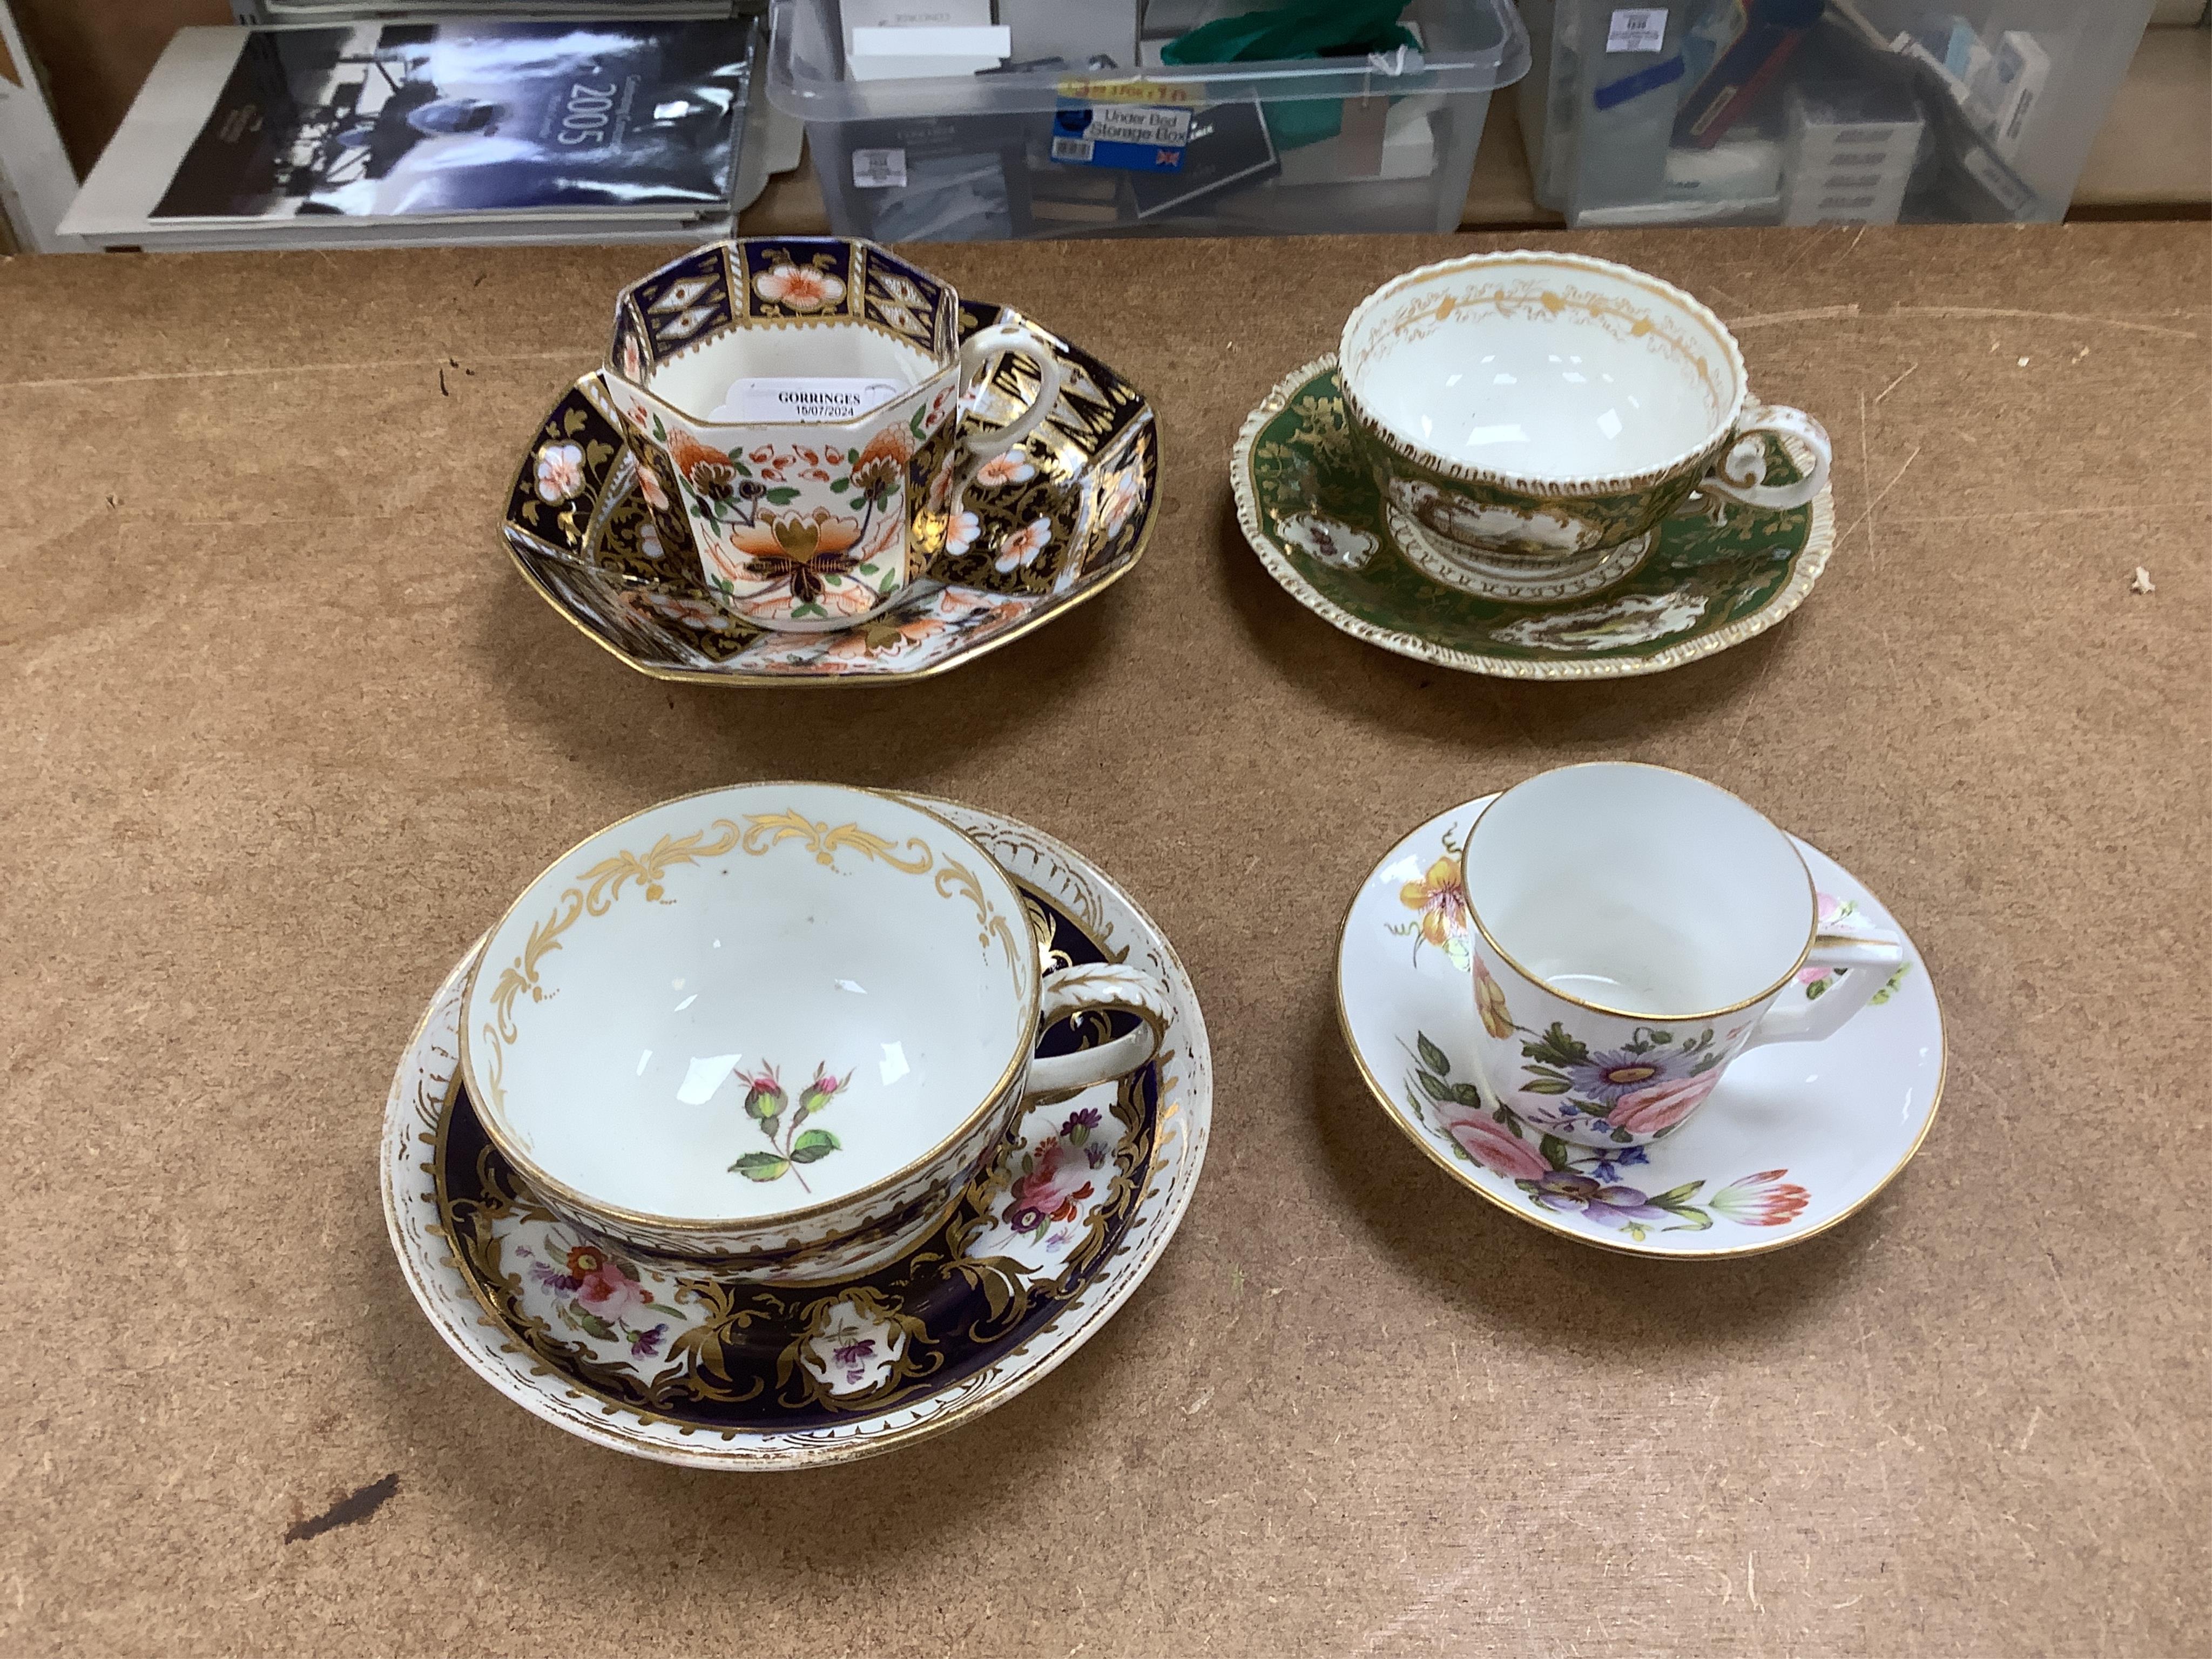 A collection of 19th century and later porcelain to include Aynsley, Davenport, Royal Crown Derby and Spode, some Imari pattern, largest 23cm in diameter. Condition - varies, mostly fair